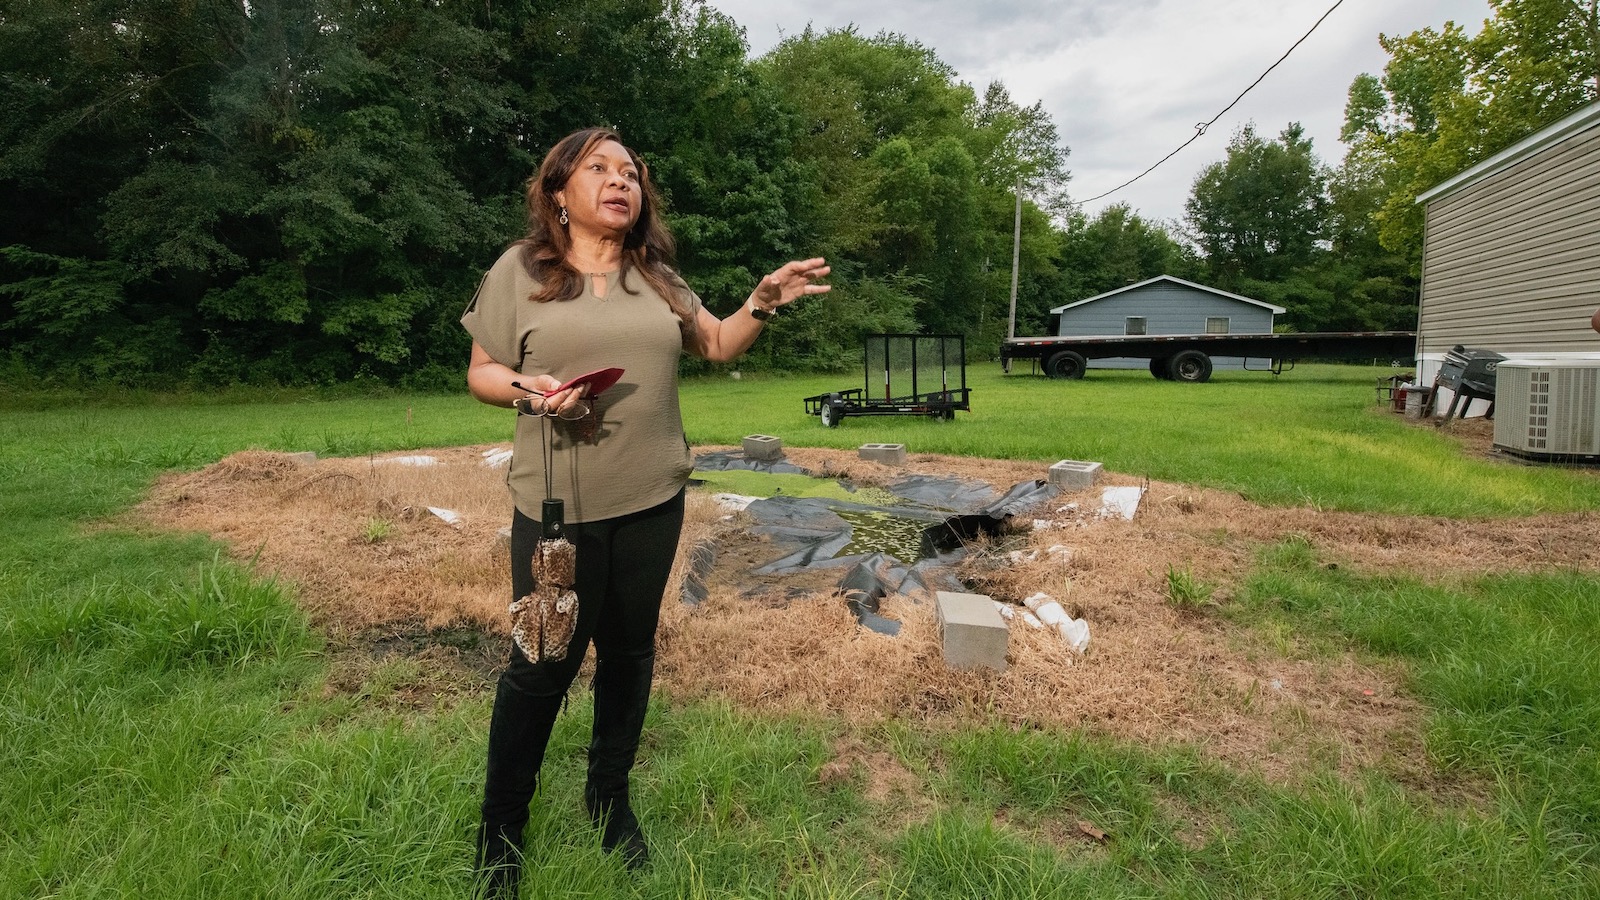 A woman dressed in black pants and an olive green blouse addresses people in the yard of a home in rural Alabama with a failing sanitation septic system.